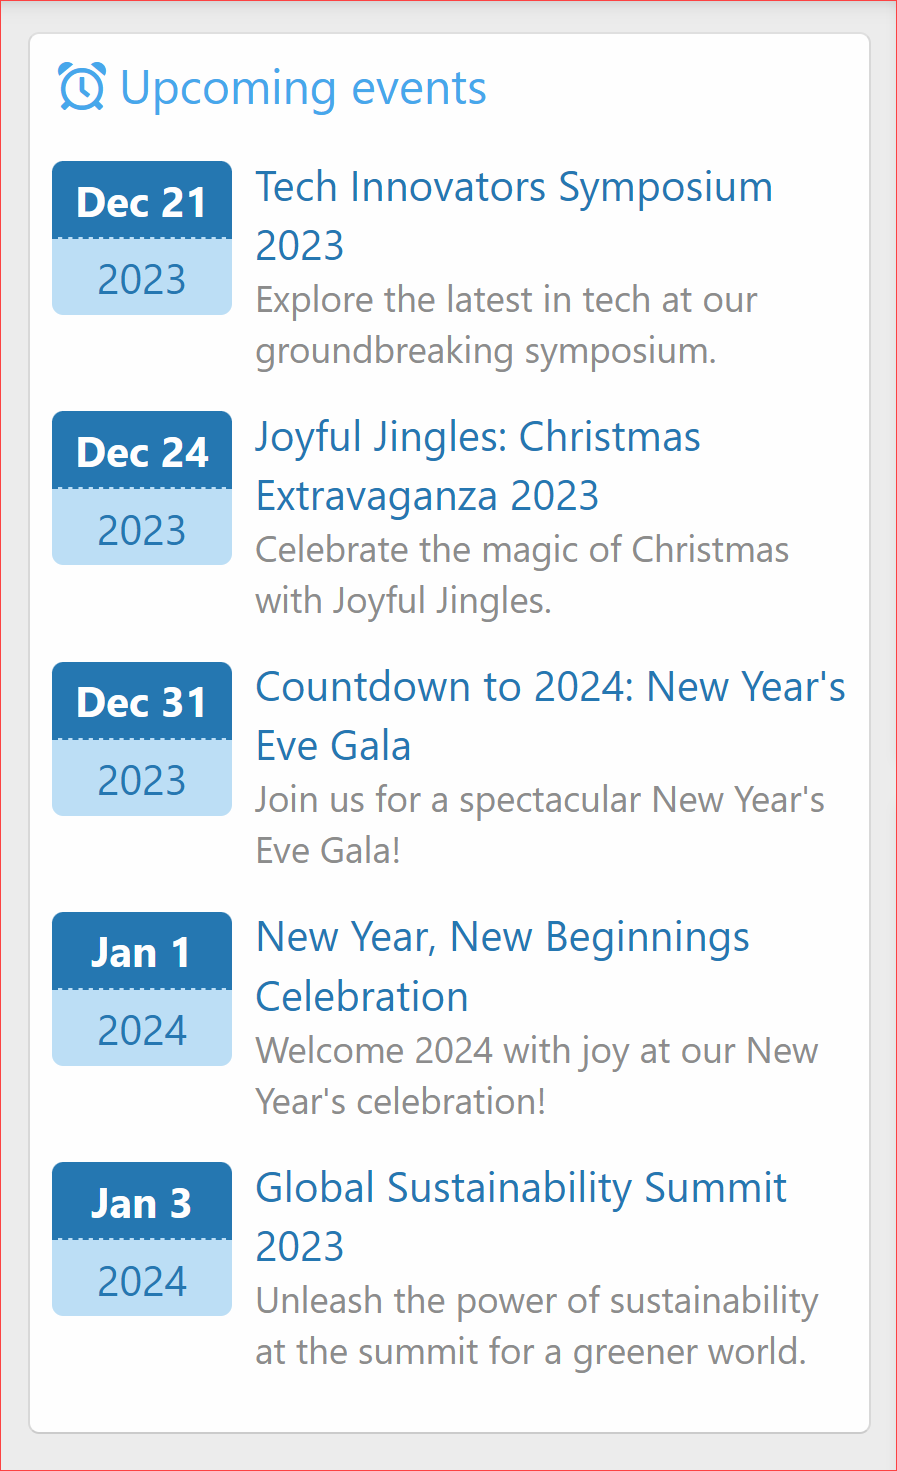 XenCustomize-Events-Manager-v100-Widget-Upcoming-Events.png